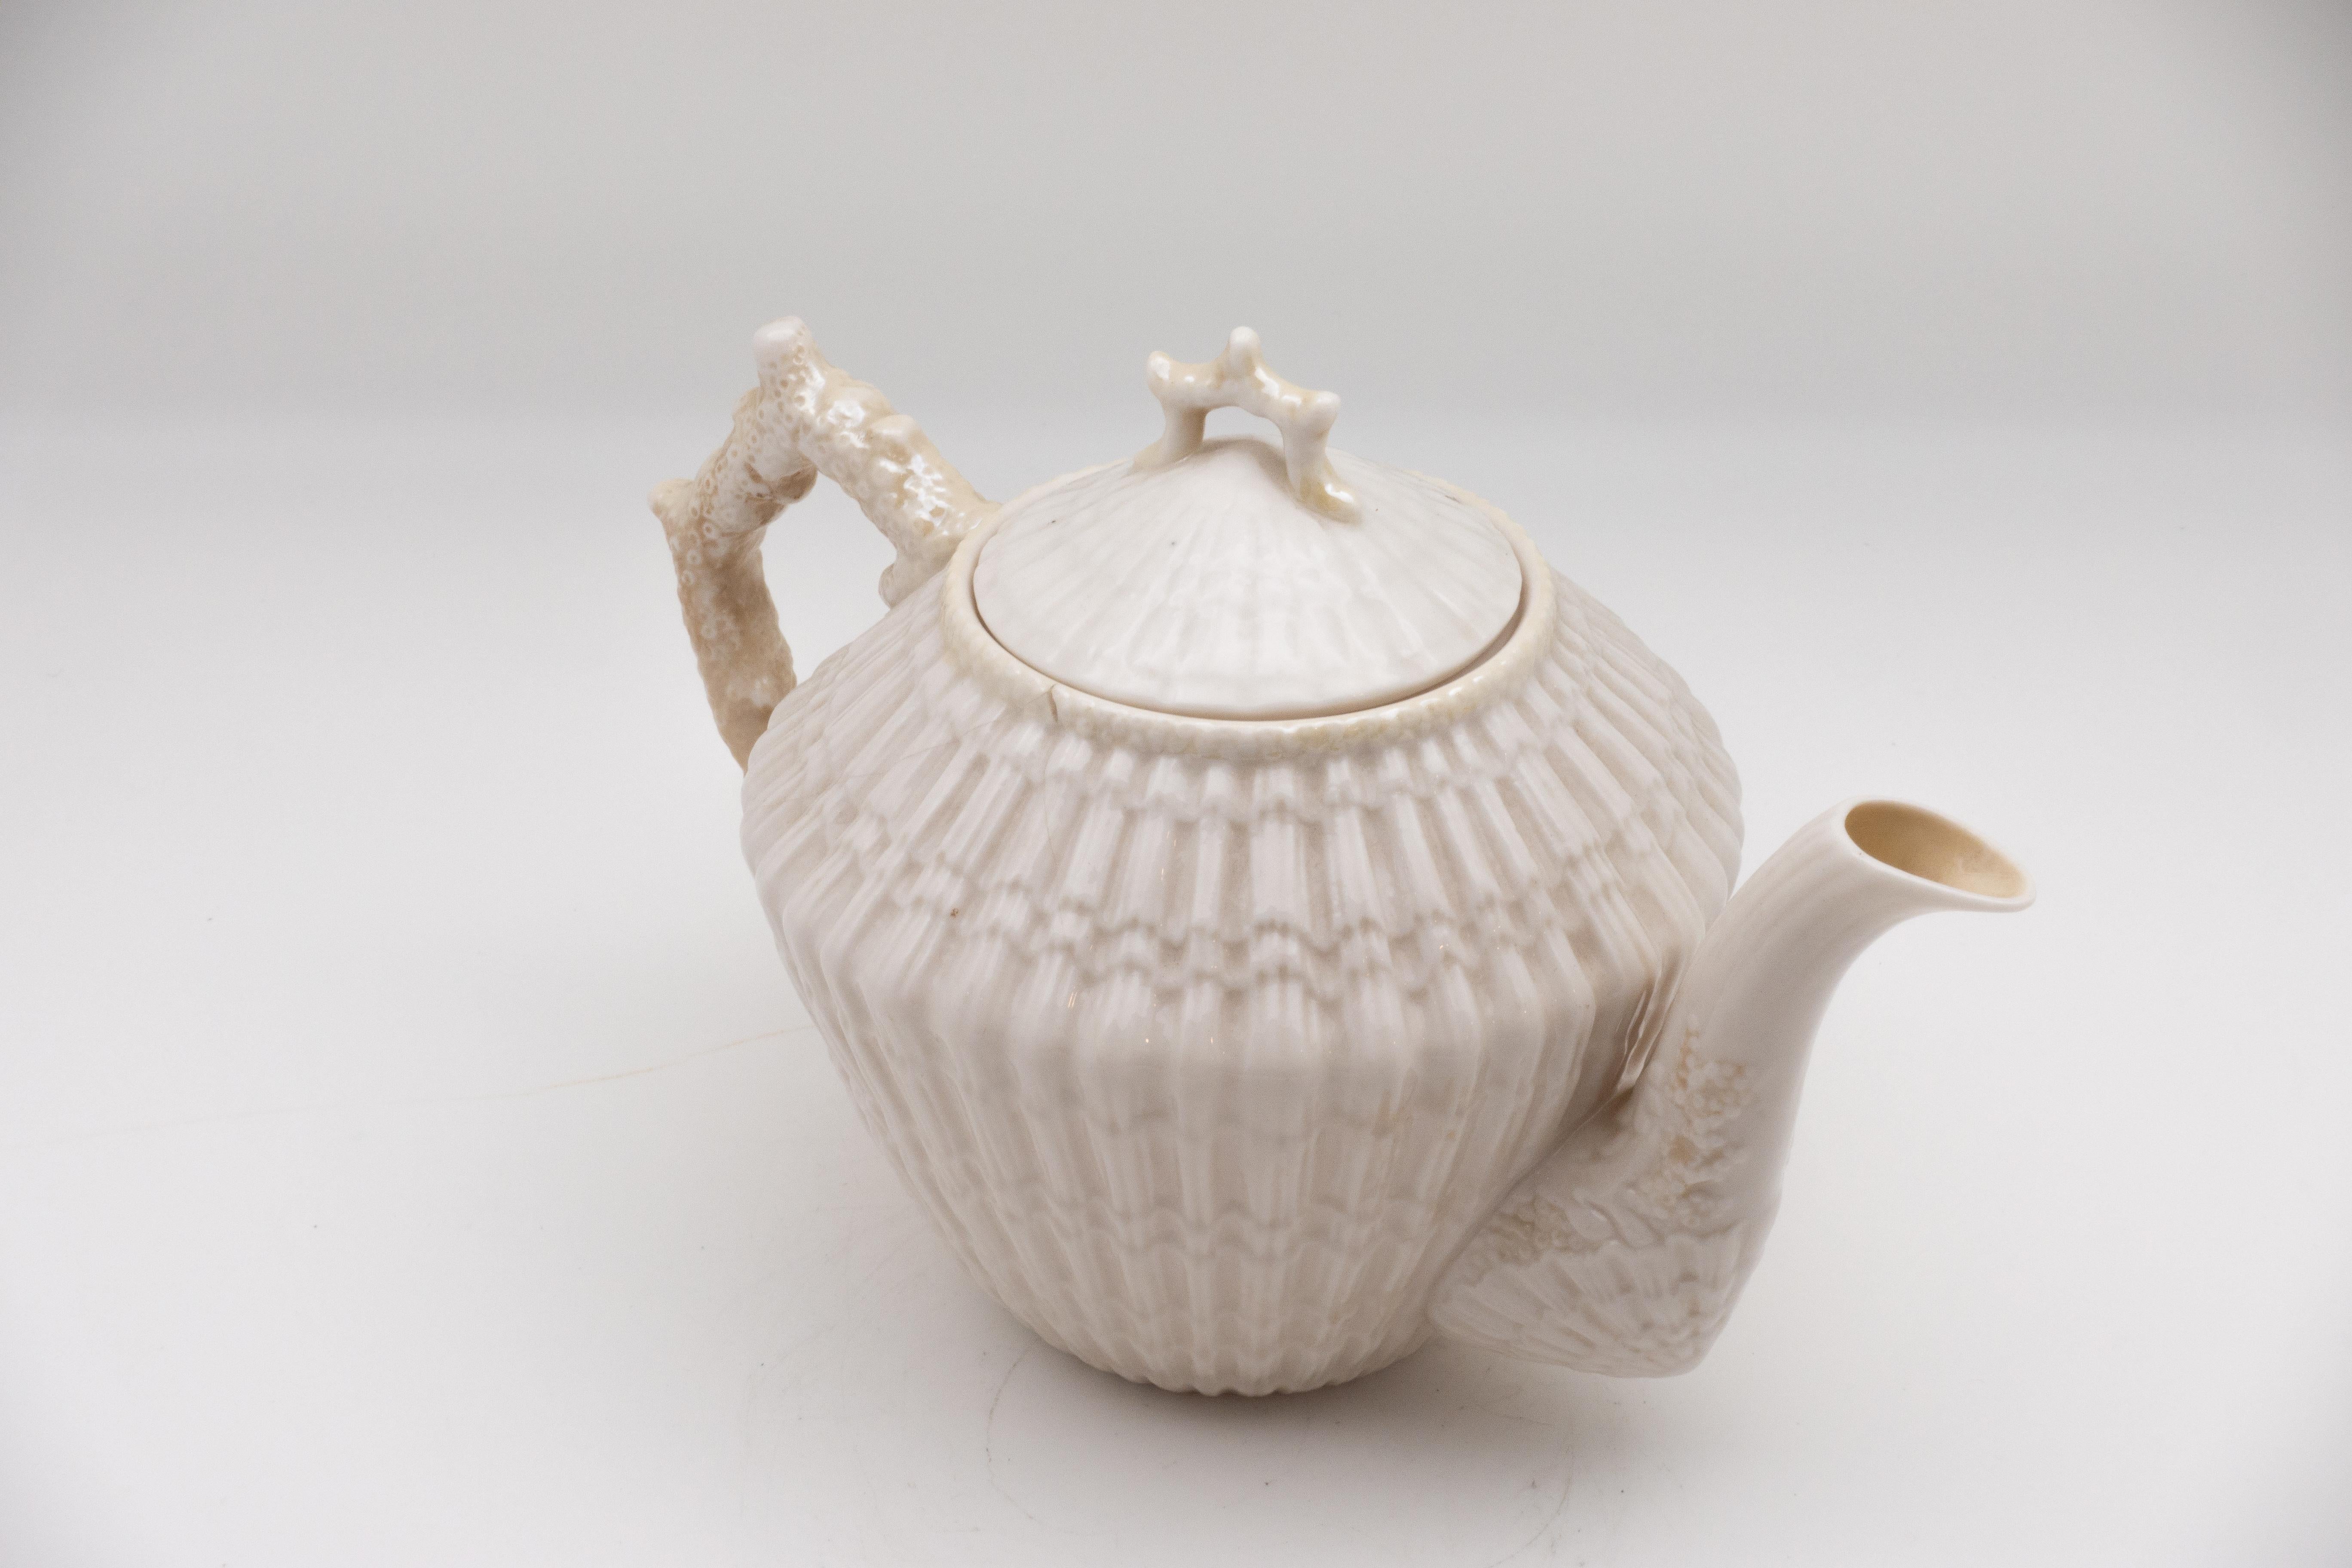 Vintage Belleek conical teapot/kettle with limpet pattern. 4th green mark on base (1946-1955).